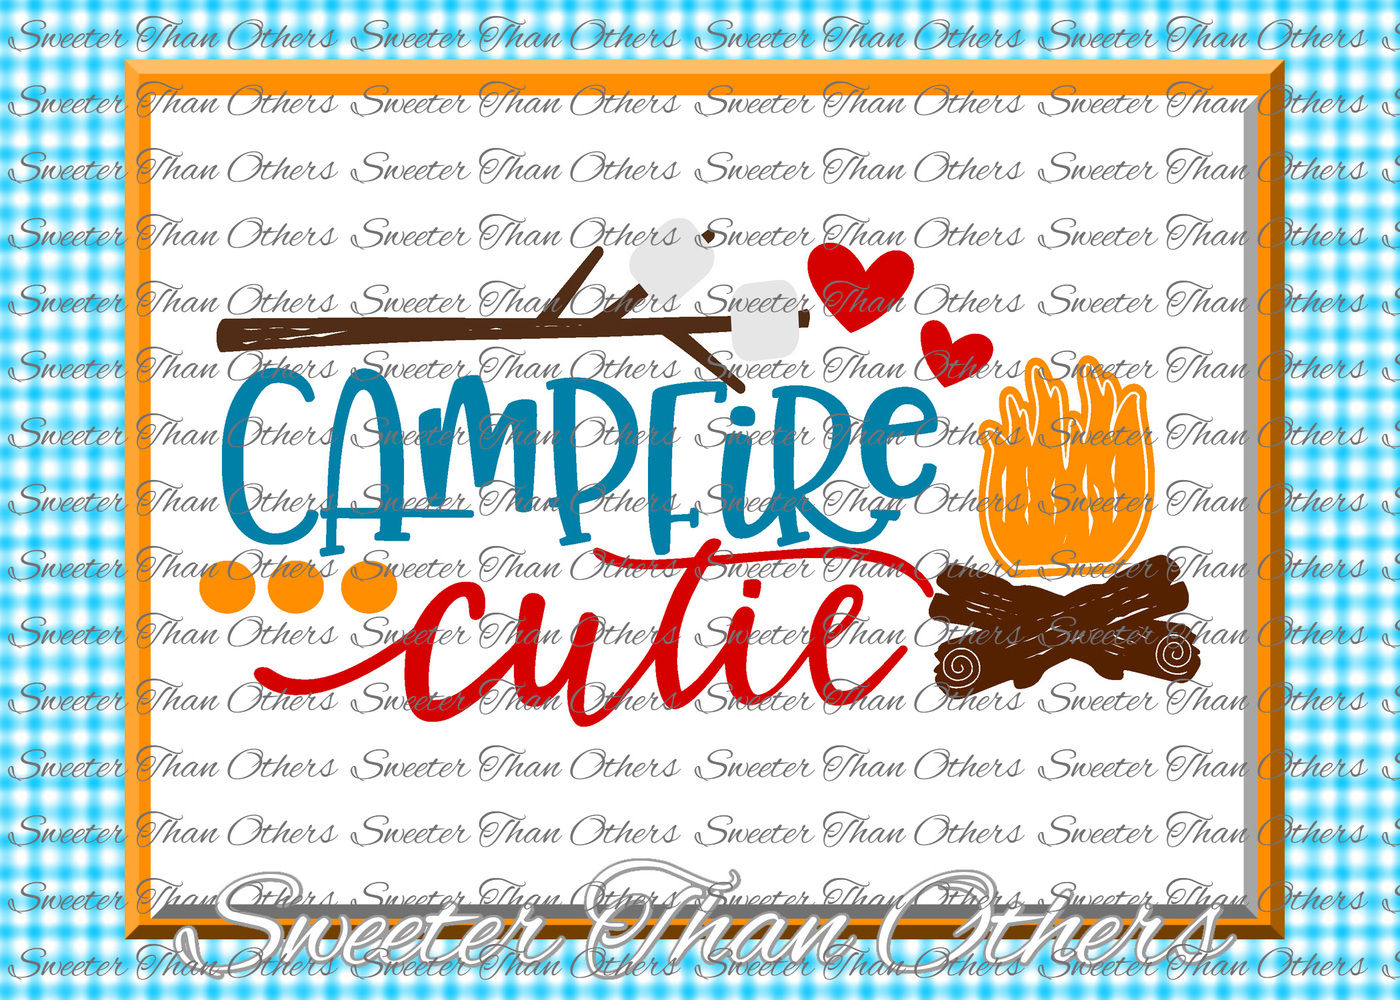 Download Campfire Cutie Vector Camping Svg Campfire Cutie Svg Pattern Dxf Silhouette Studios Cameo Cut File Cricut Cut File Instant Download Vinyl Design Htv Scal By Sweeter Than Others Thehungryjpeg Com SVG, PNG, EPS, DXF File